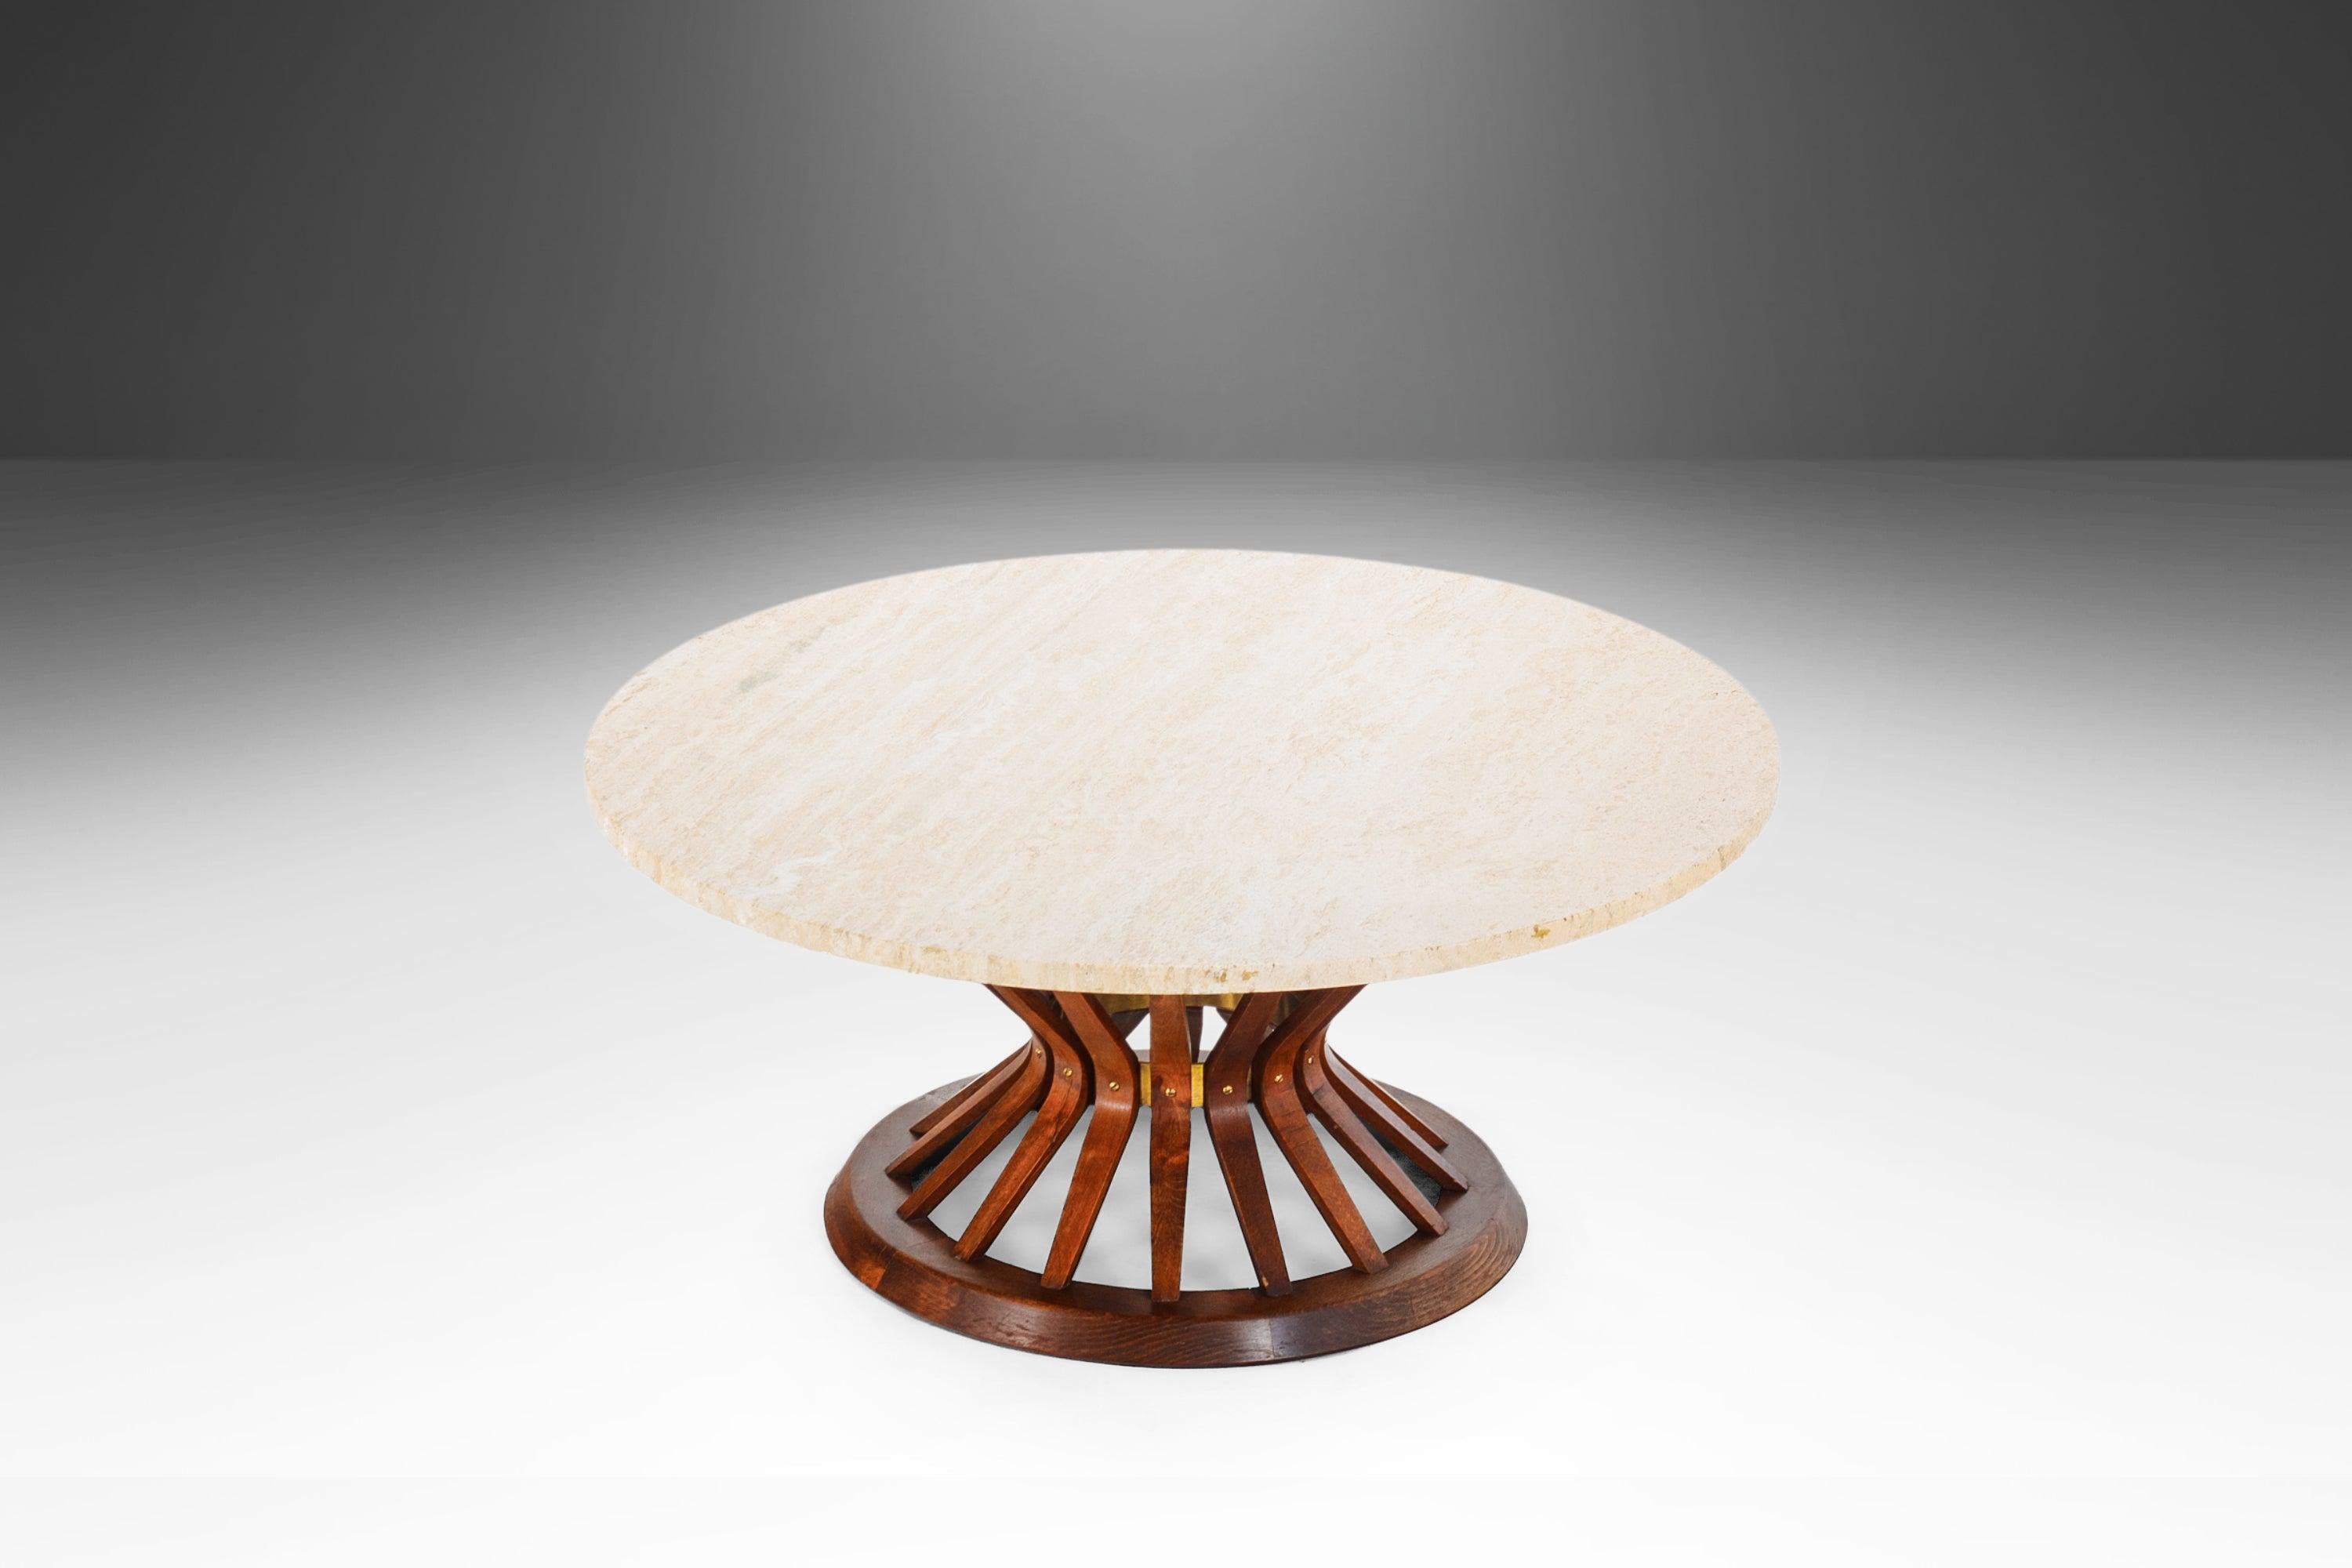 Sheaf of Wheat Marble Cocktail / Coffee Table by Edward Wormley for Dunbar, 1960 For Sale 3